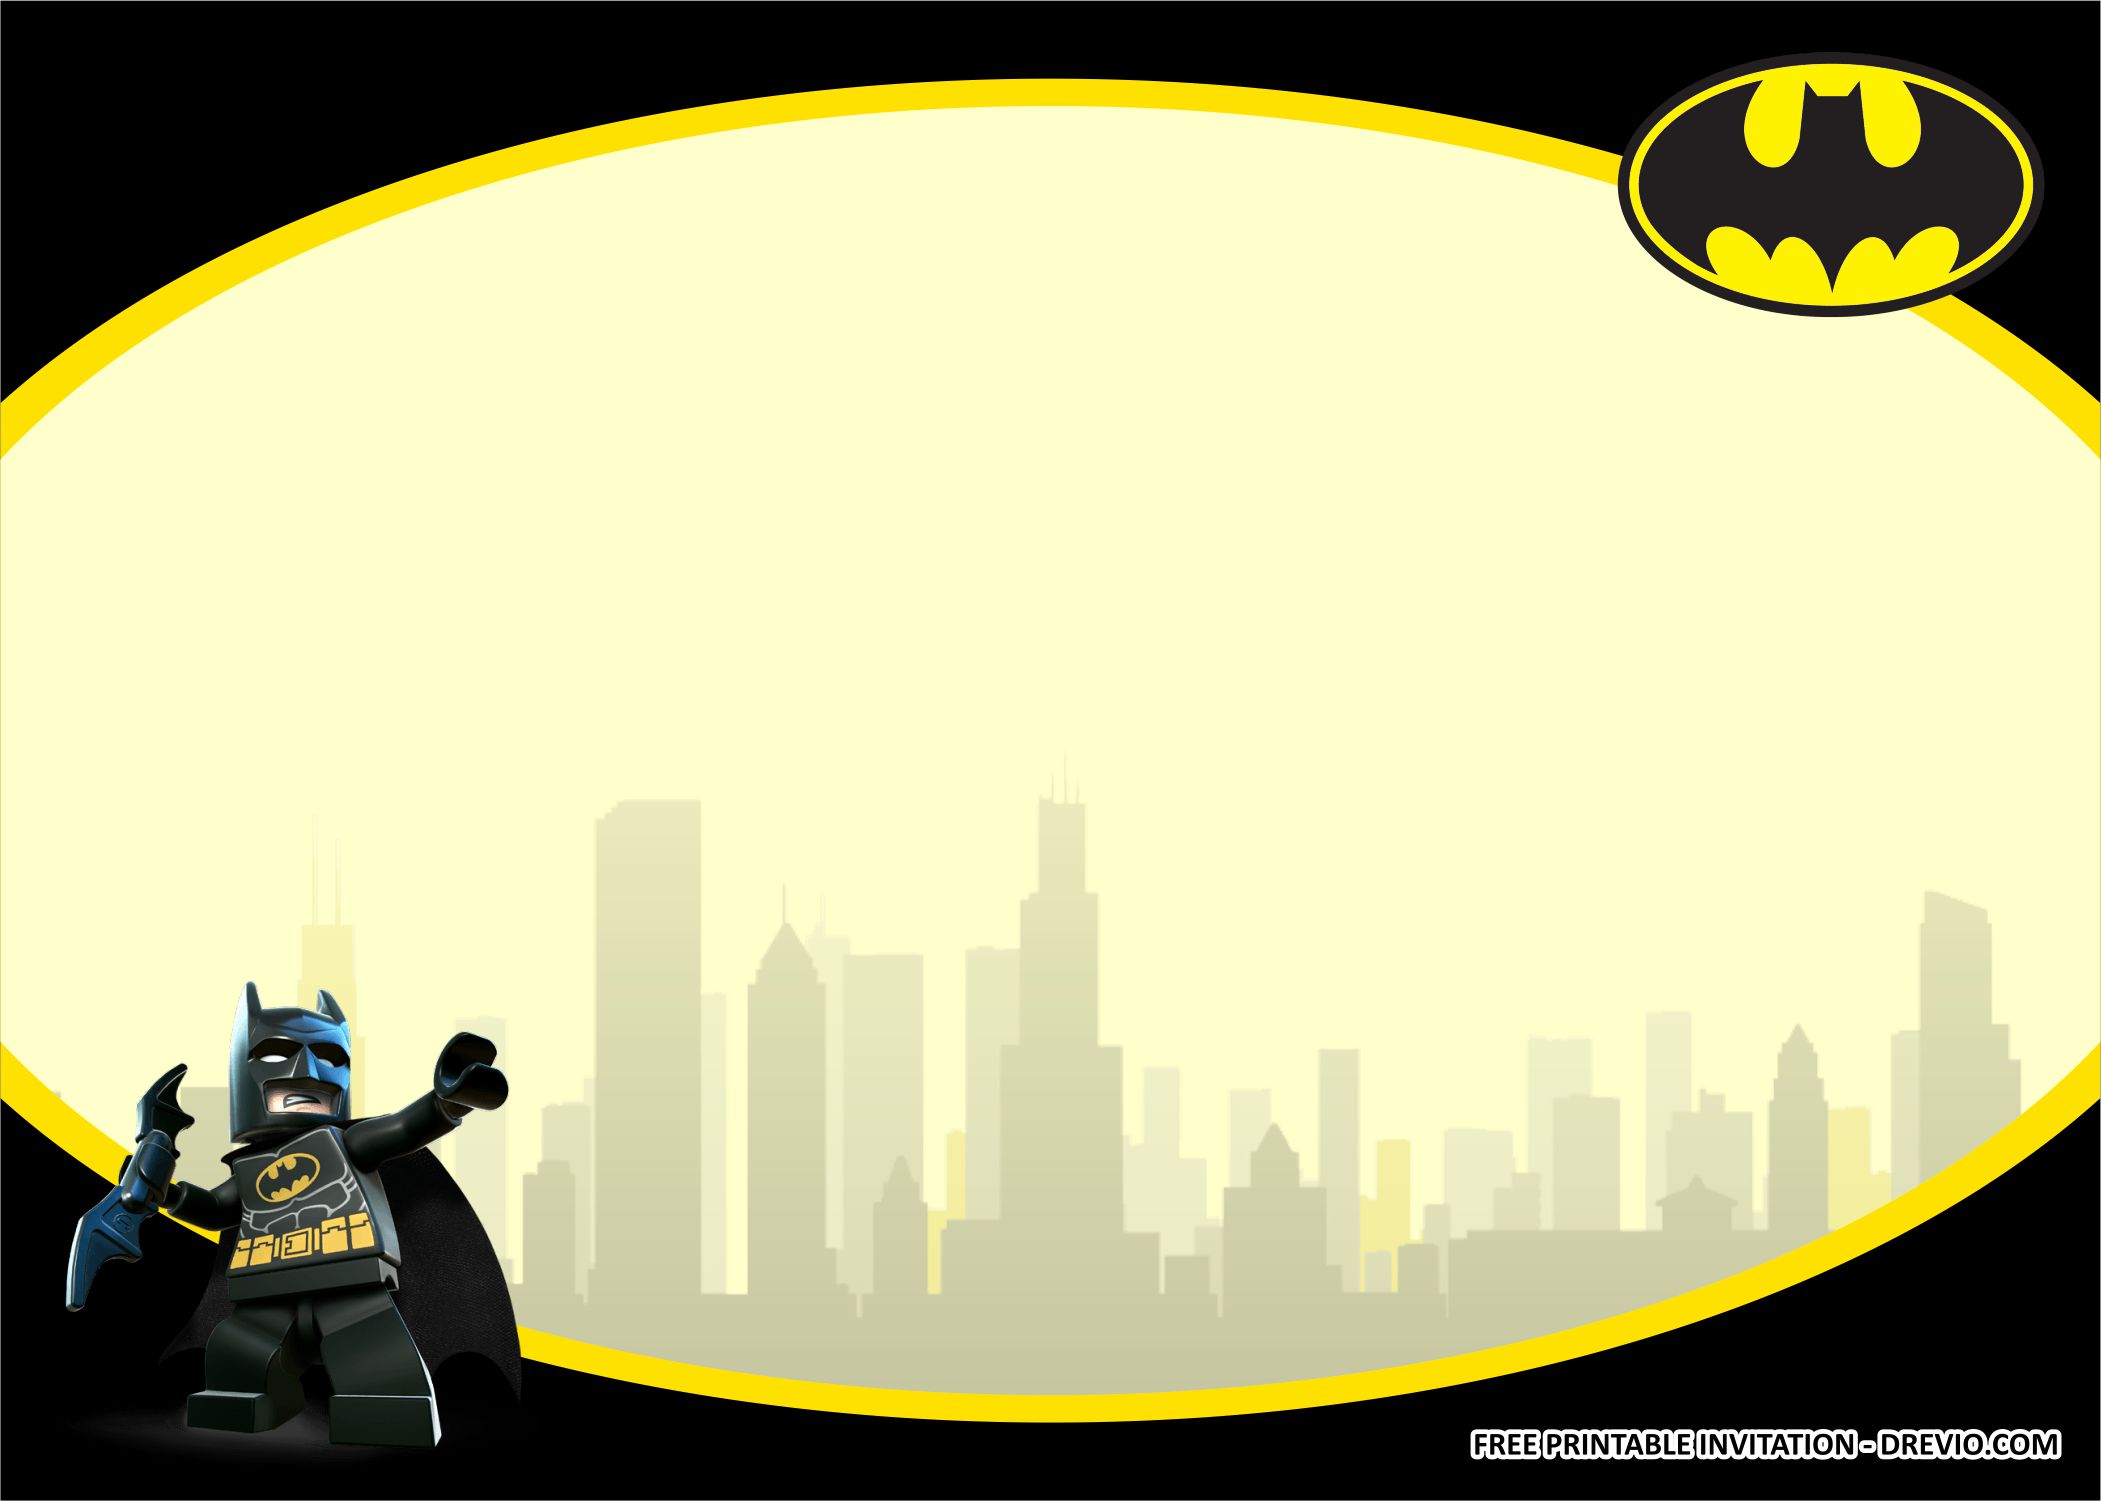 Impressive Ideas to Host a Lego Batman Party for Your Lovely Kids |  Download Hundreds FREE PRINTABLE Birthday Invitation Templates